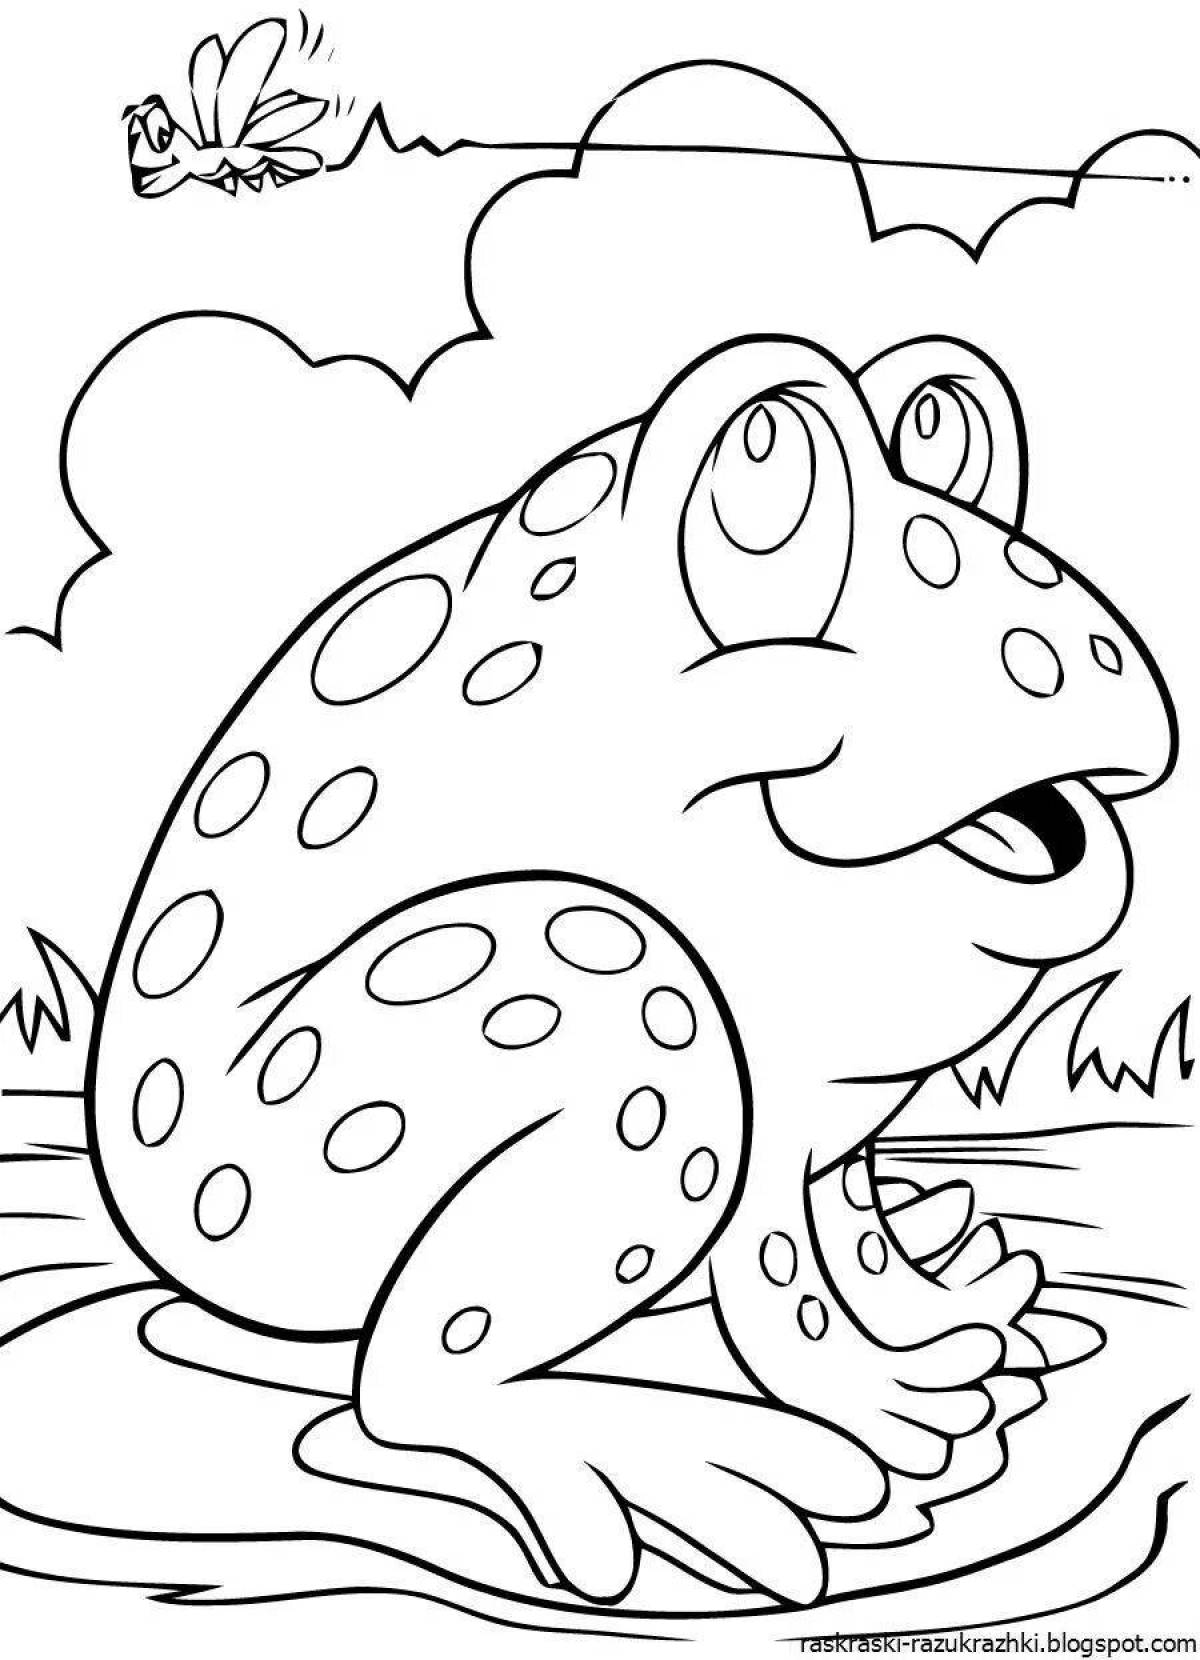 Fabulous animal coloring pages for kids 5 years old